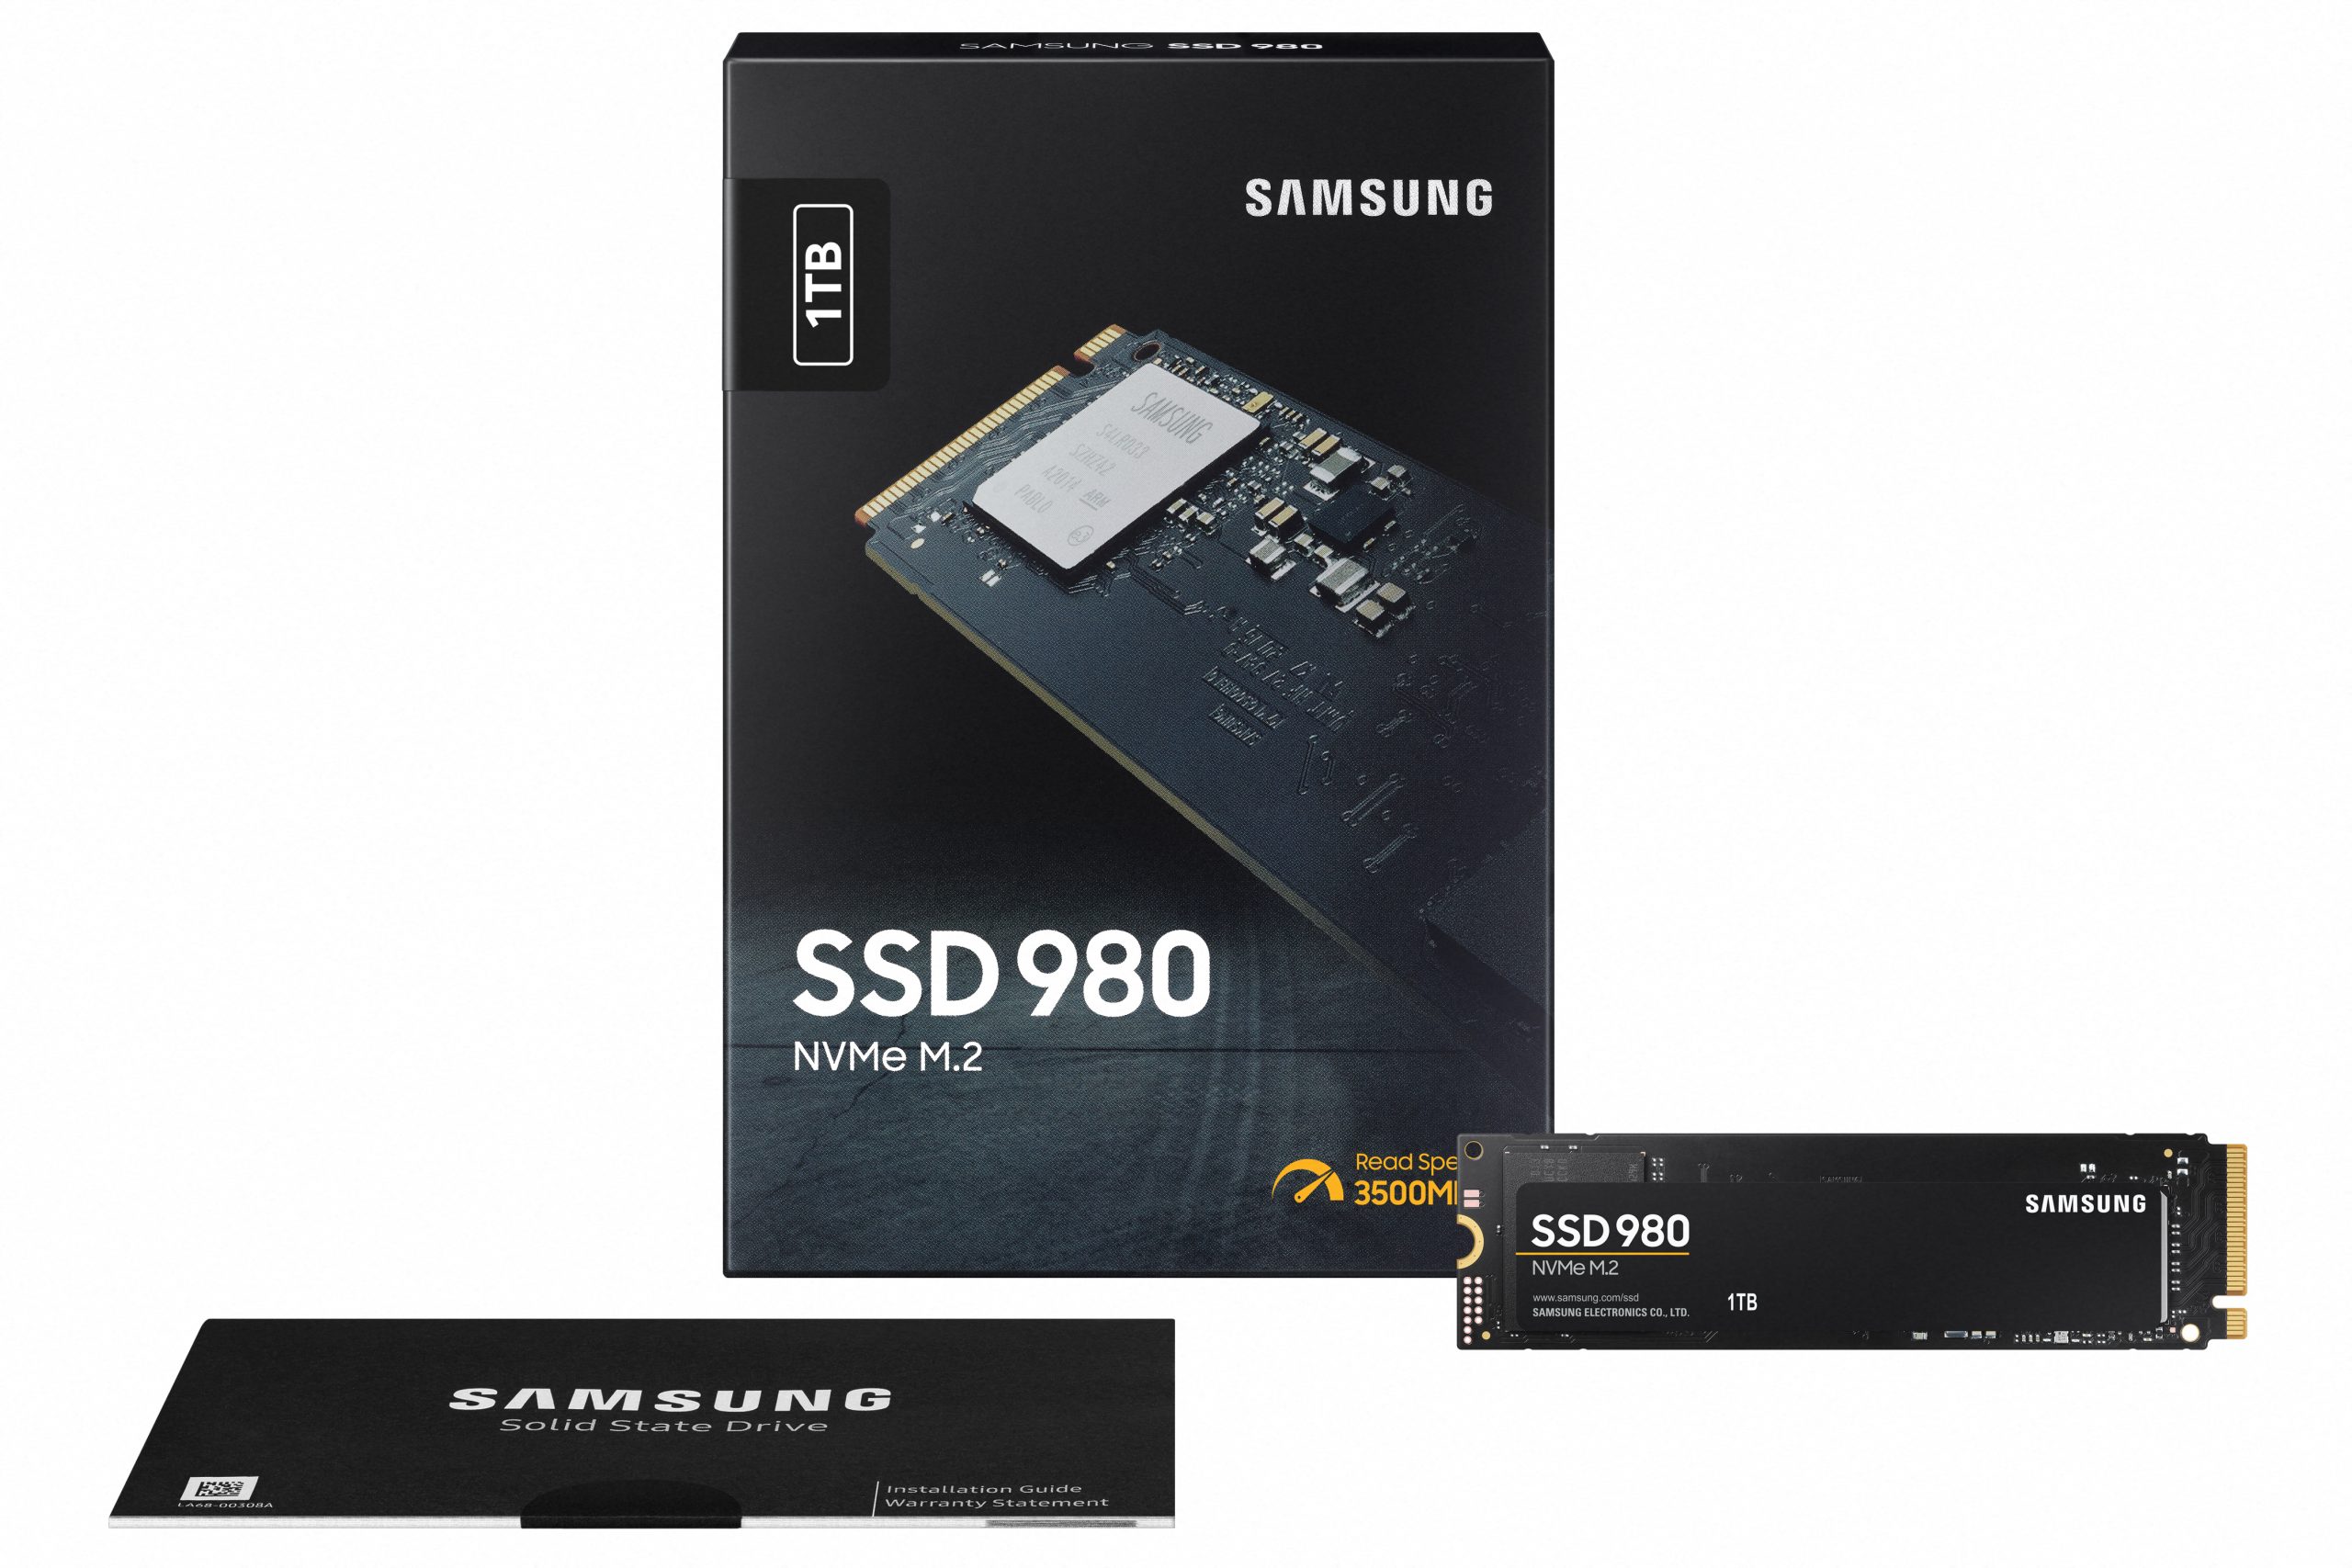 Samsung launced its new SSD series, simply called 980